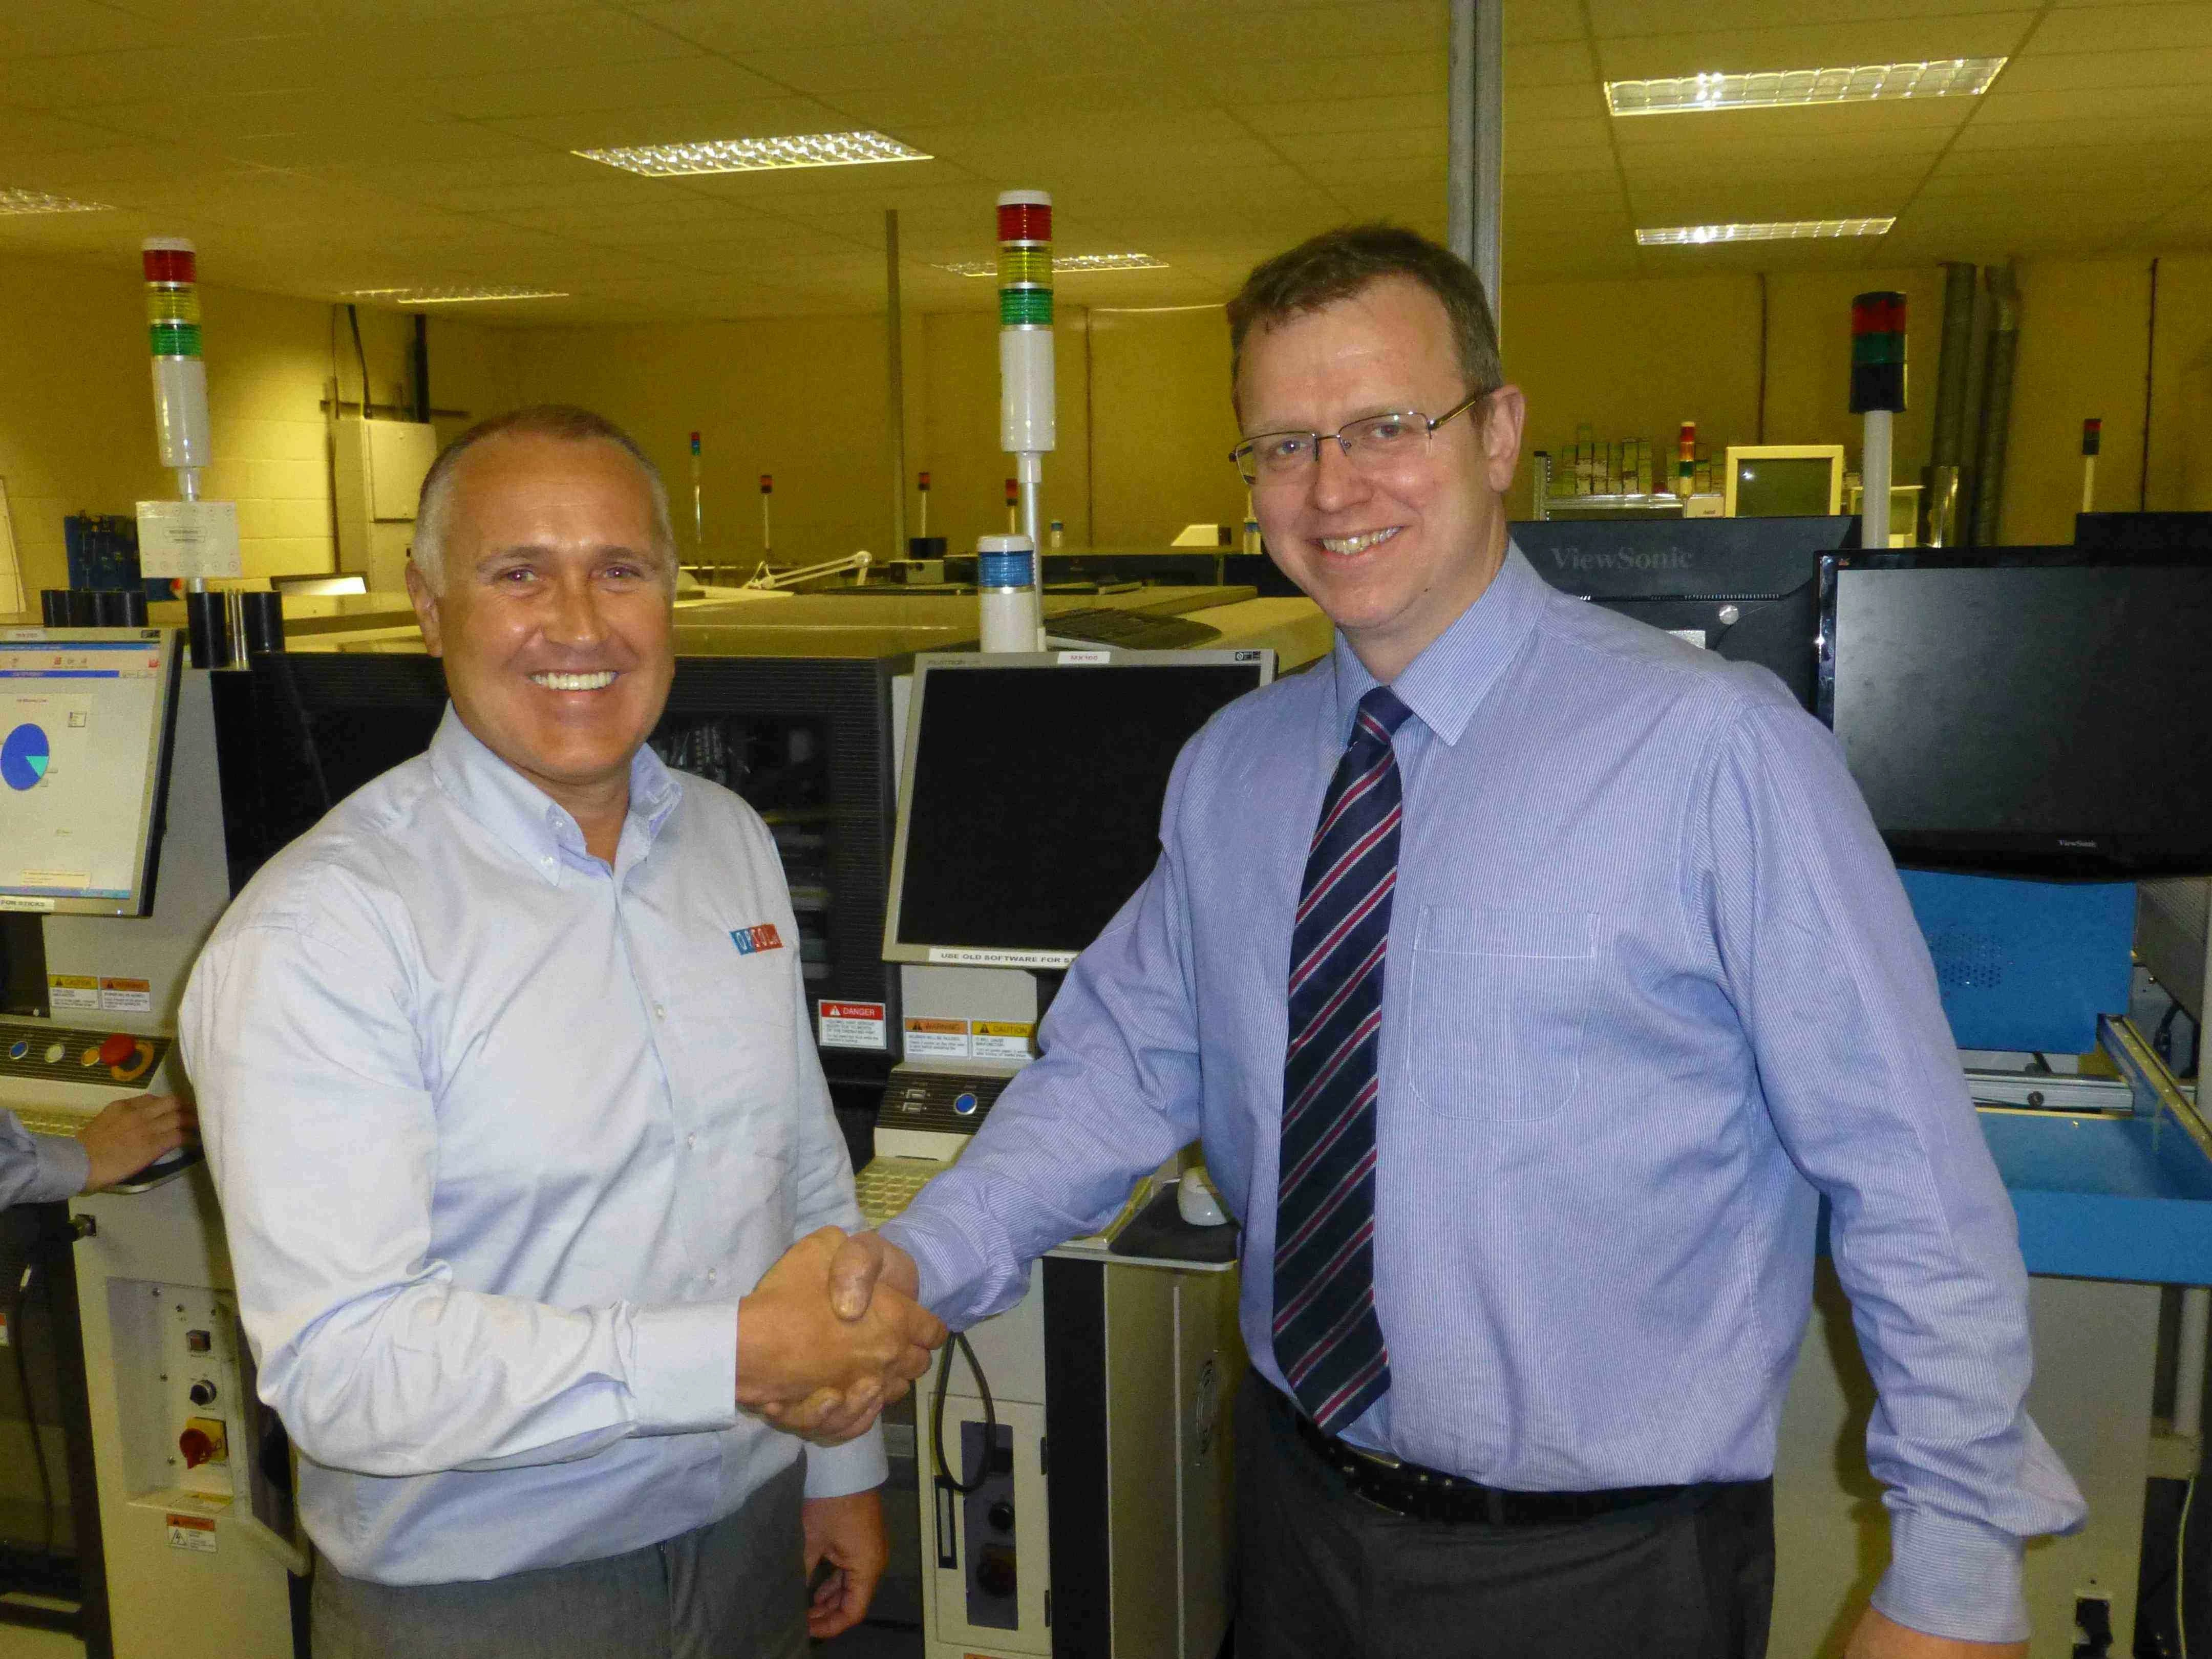 (L-R) Malcolm Humble welcomes Richard Whitehead to OPSOL UK